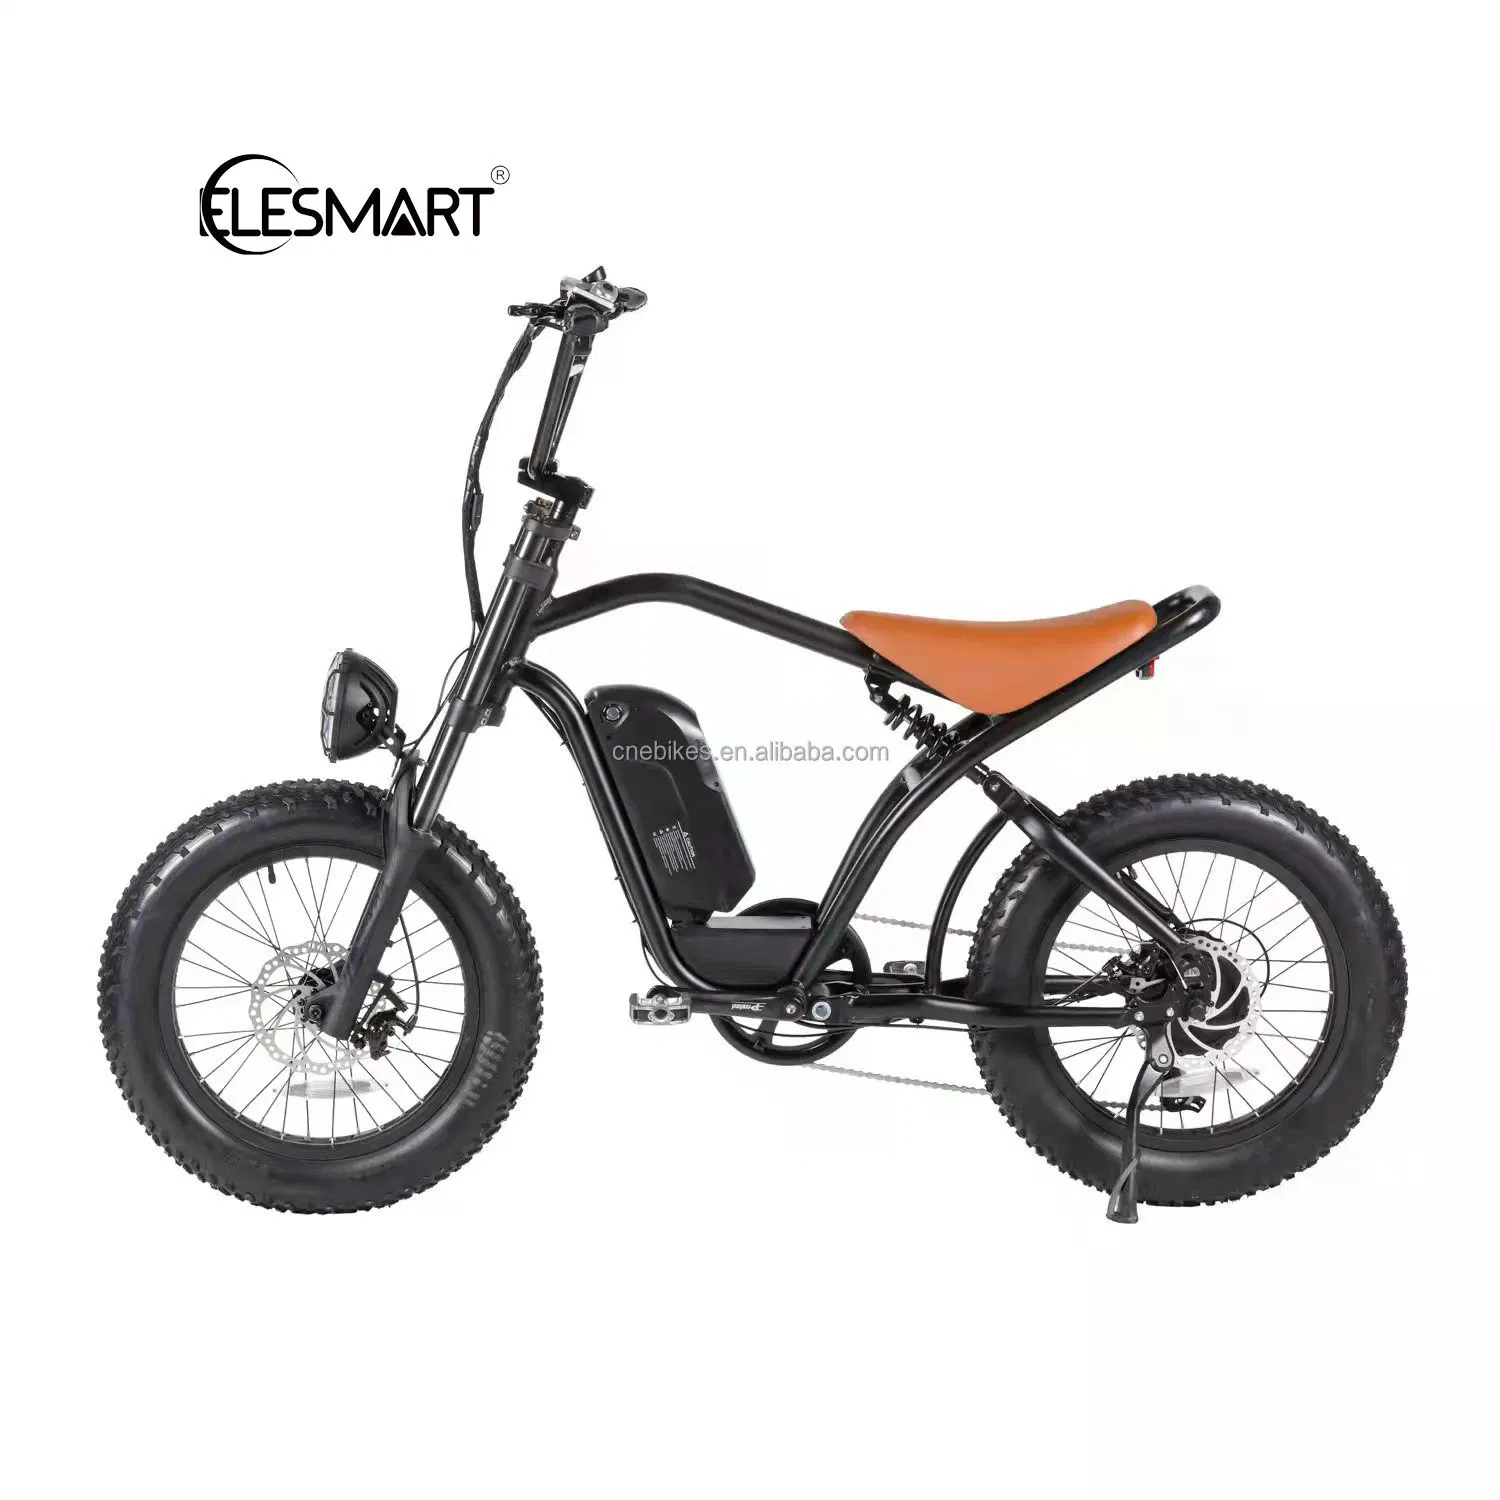 Elesmart Manufacture 16" 24V 10ah Electric Vintage Mountain Ebike CT16A Electric Bicycle 20km/H Child Electric Bicycle Bike